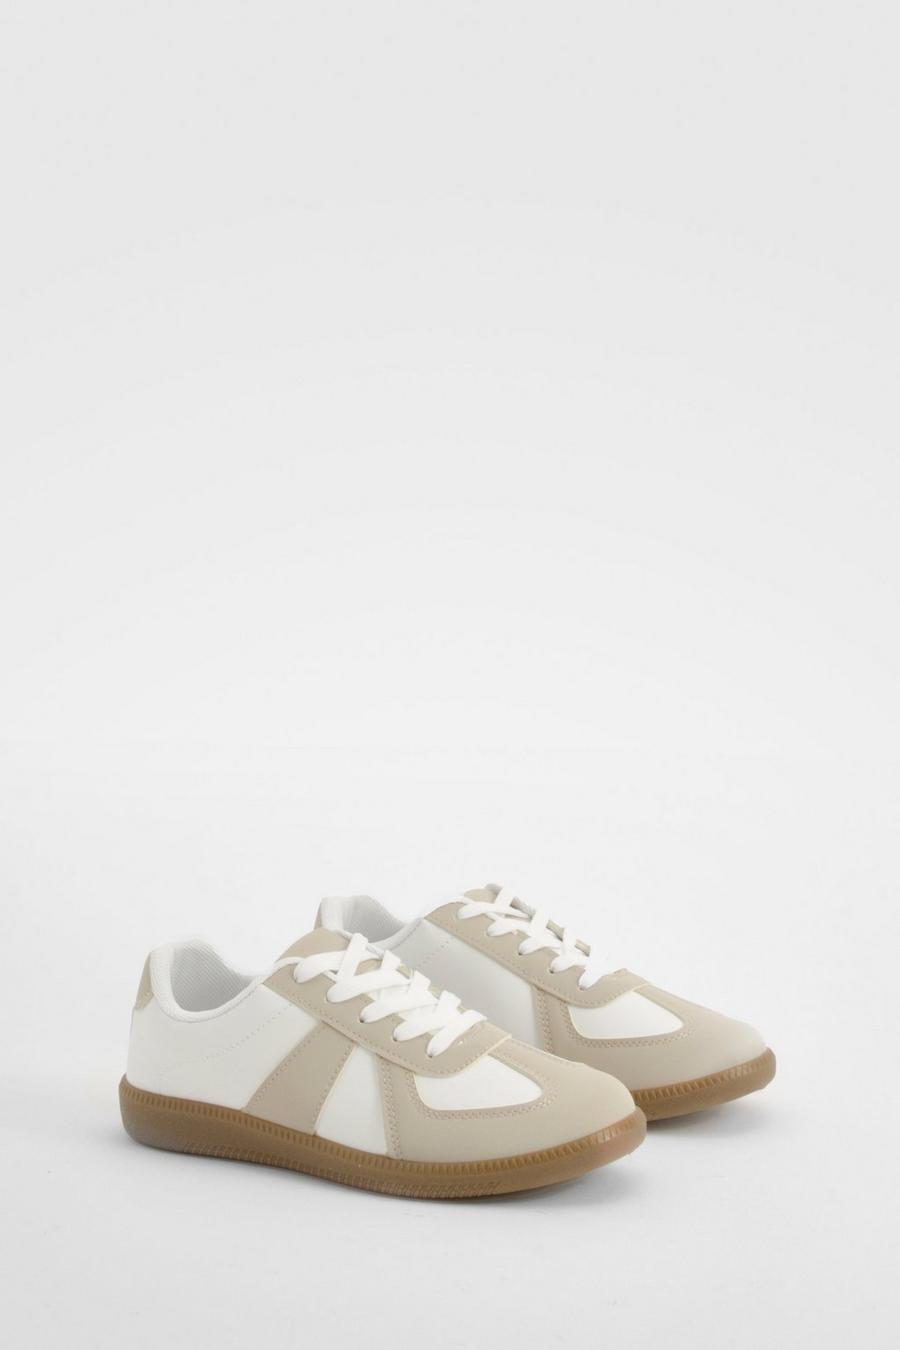 Beige Contrast Panel Gum Sole Trainers